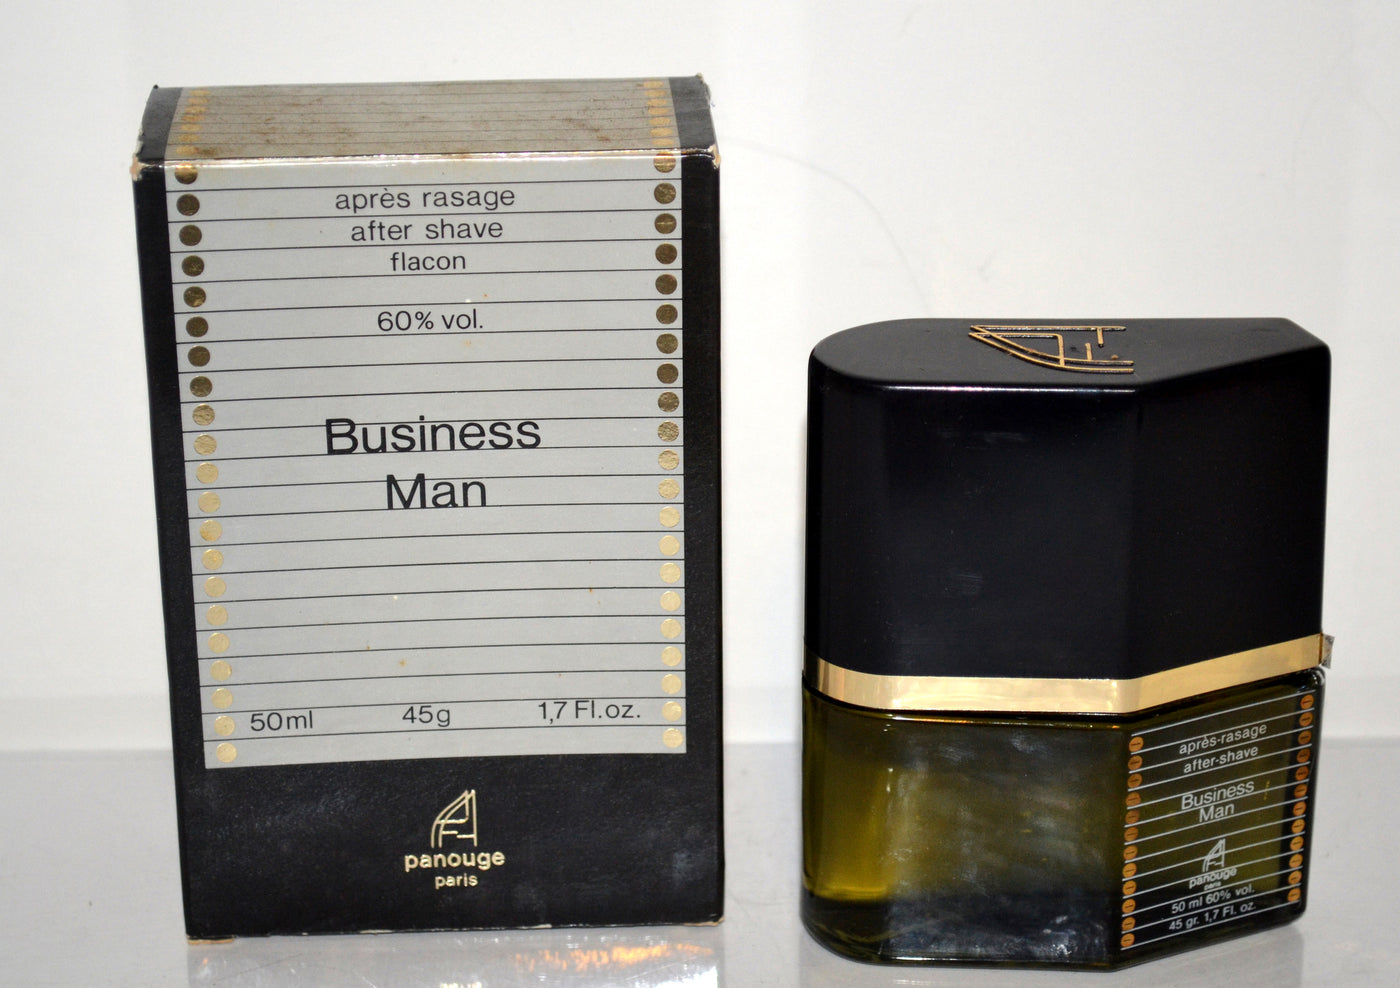 Panouge Business Man After Shave